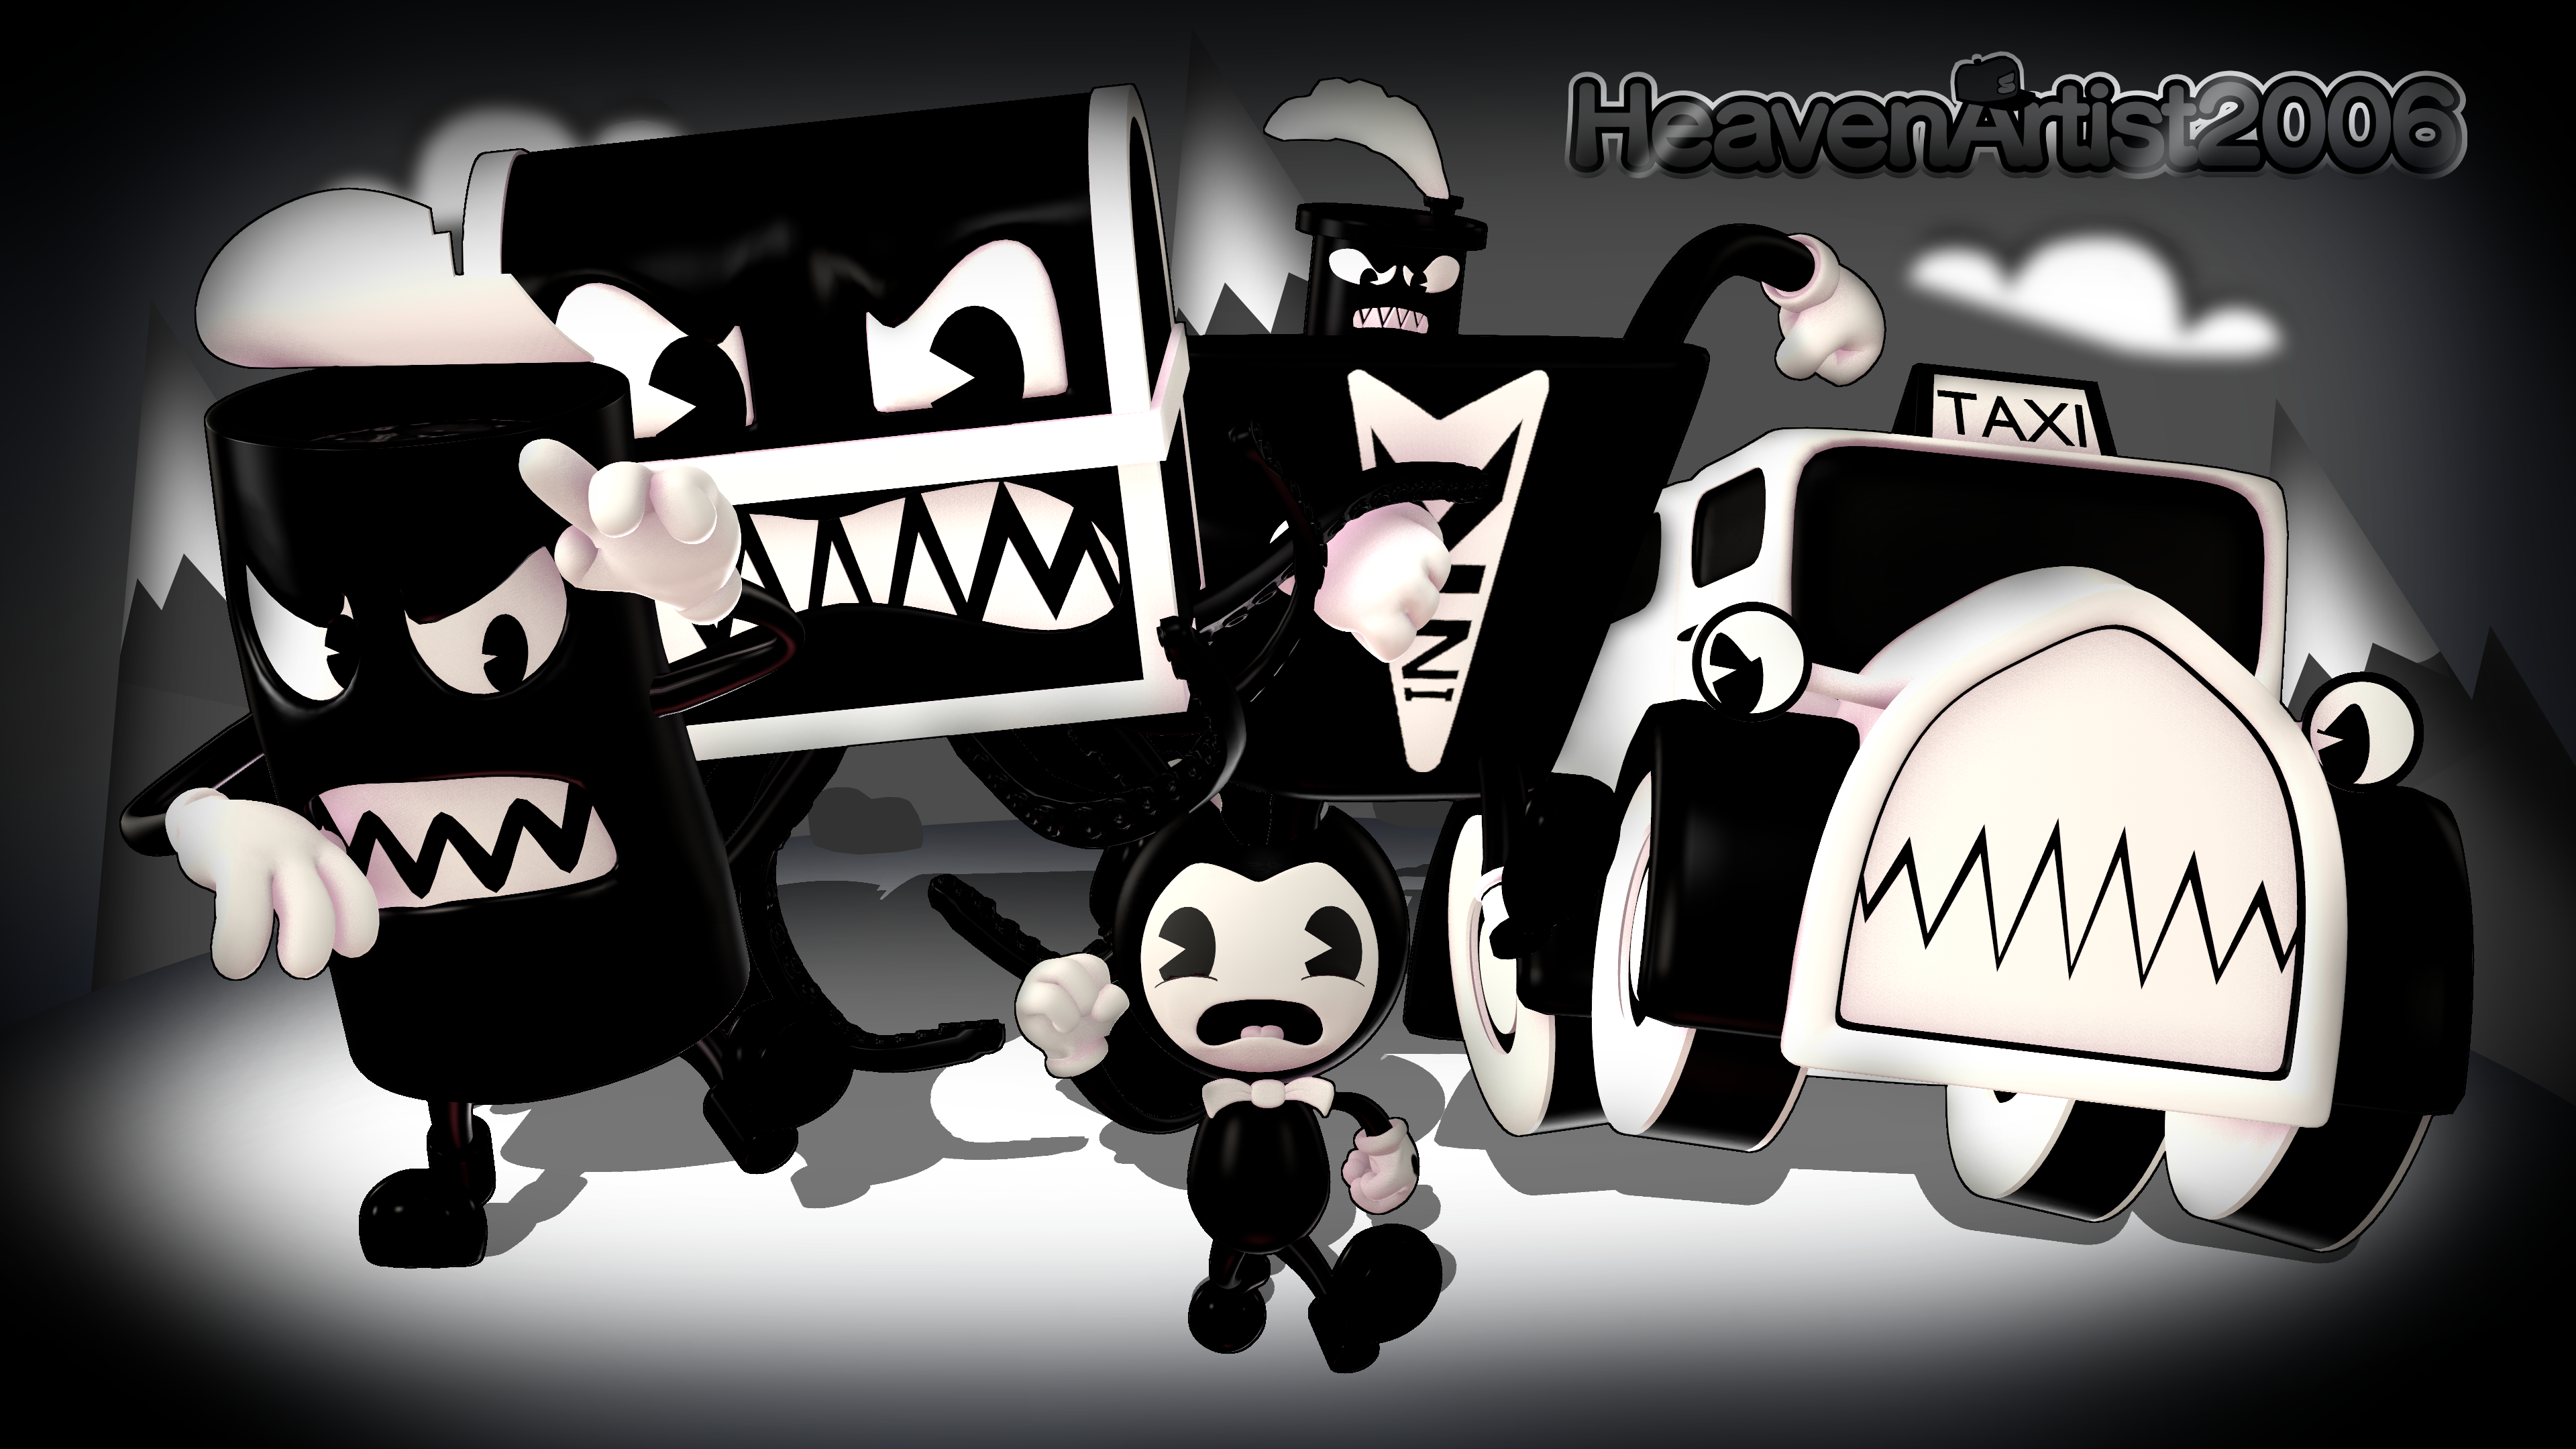 Bendy in Nightmare Run - APK Download for Android